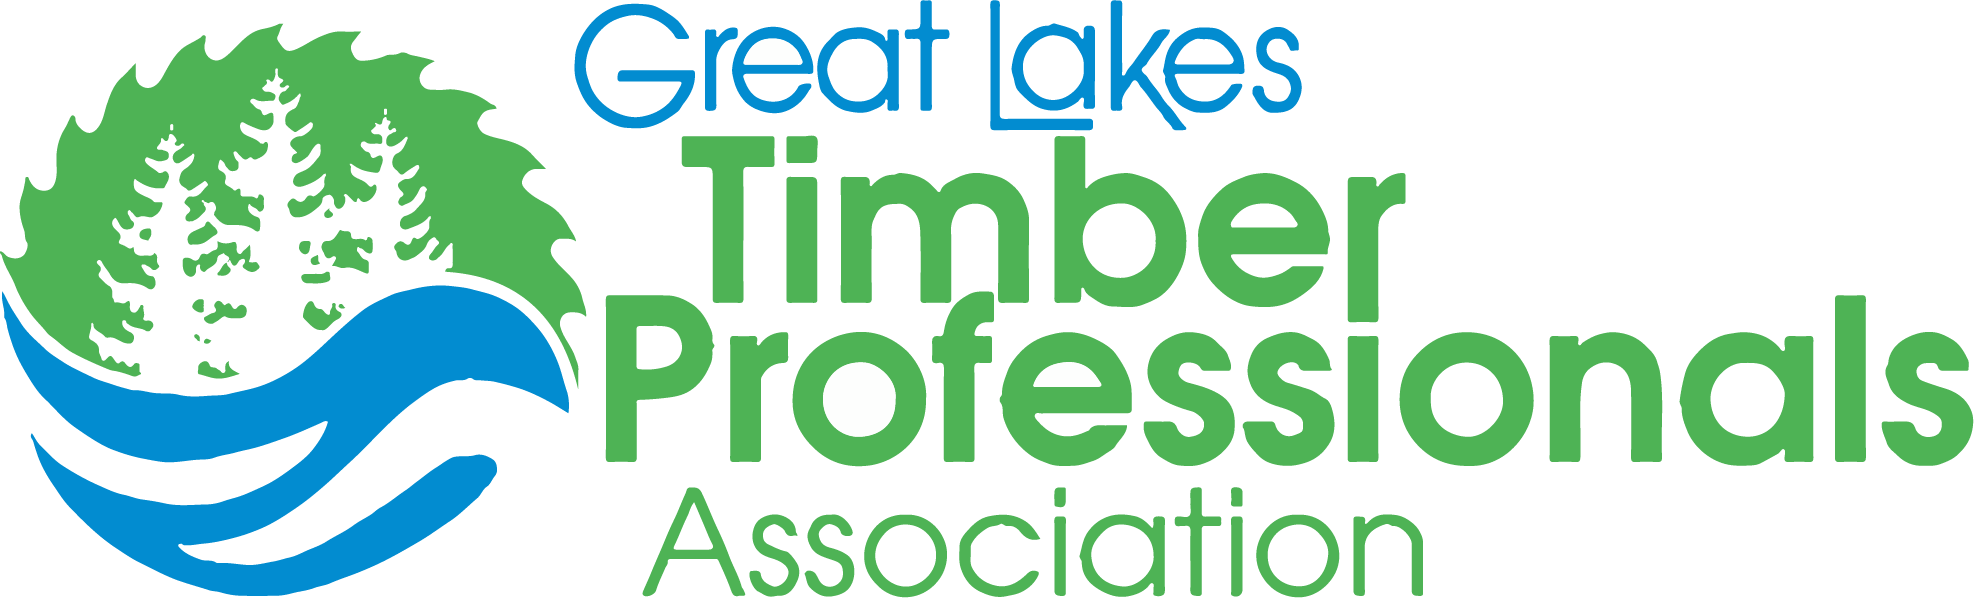 Great Lakes Timber Professionals Association Logo PNG